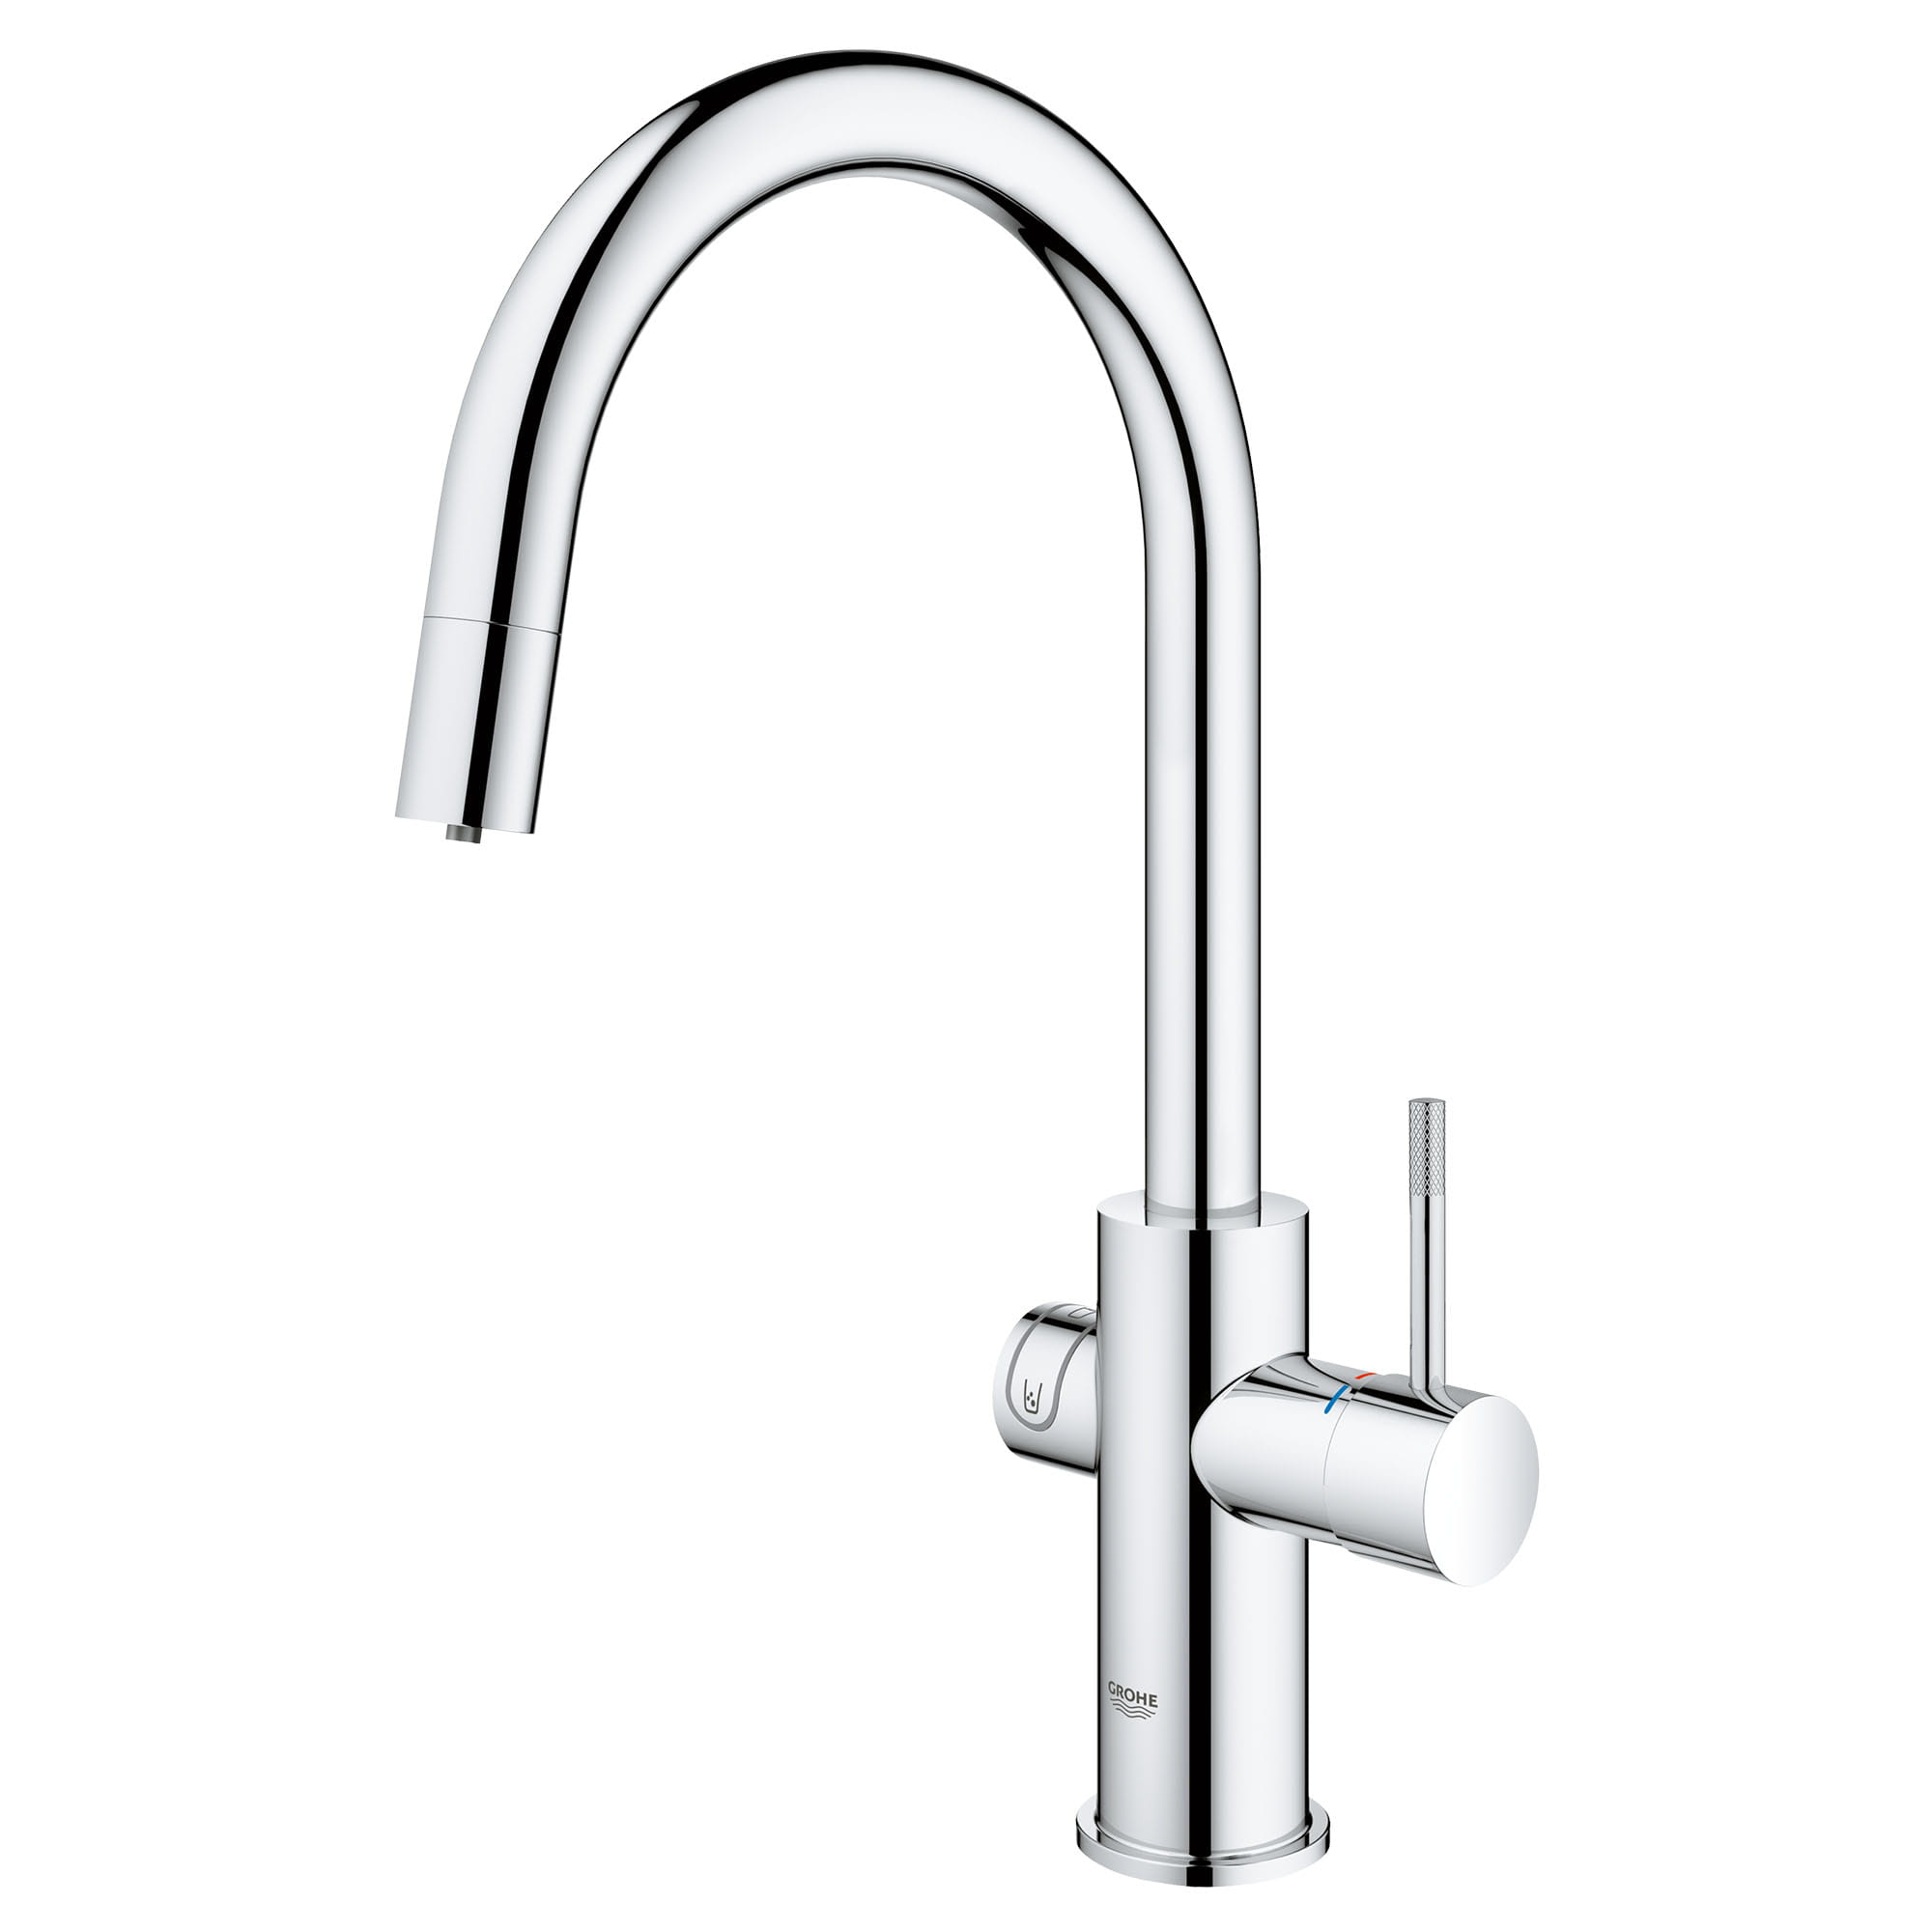 Single Handle Pull Down Kitchen Faucet Single Spray 175gpm With Chilled and Sparkling Water GROHE CHROME